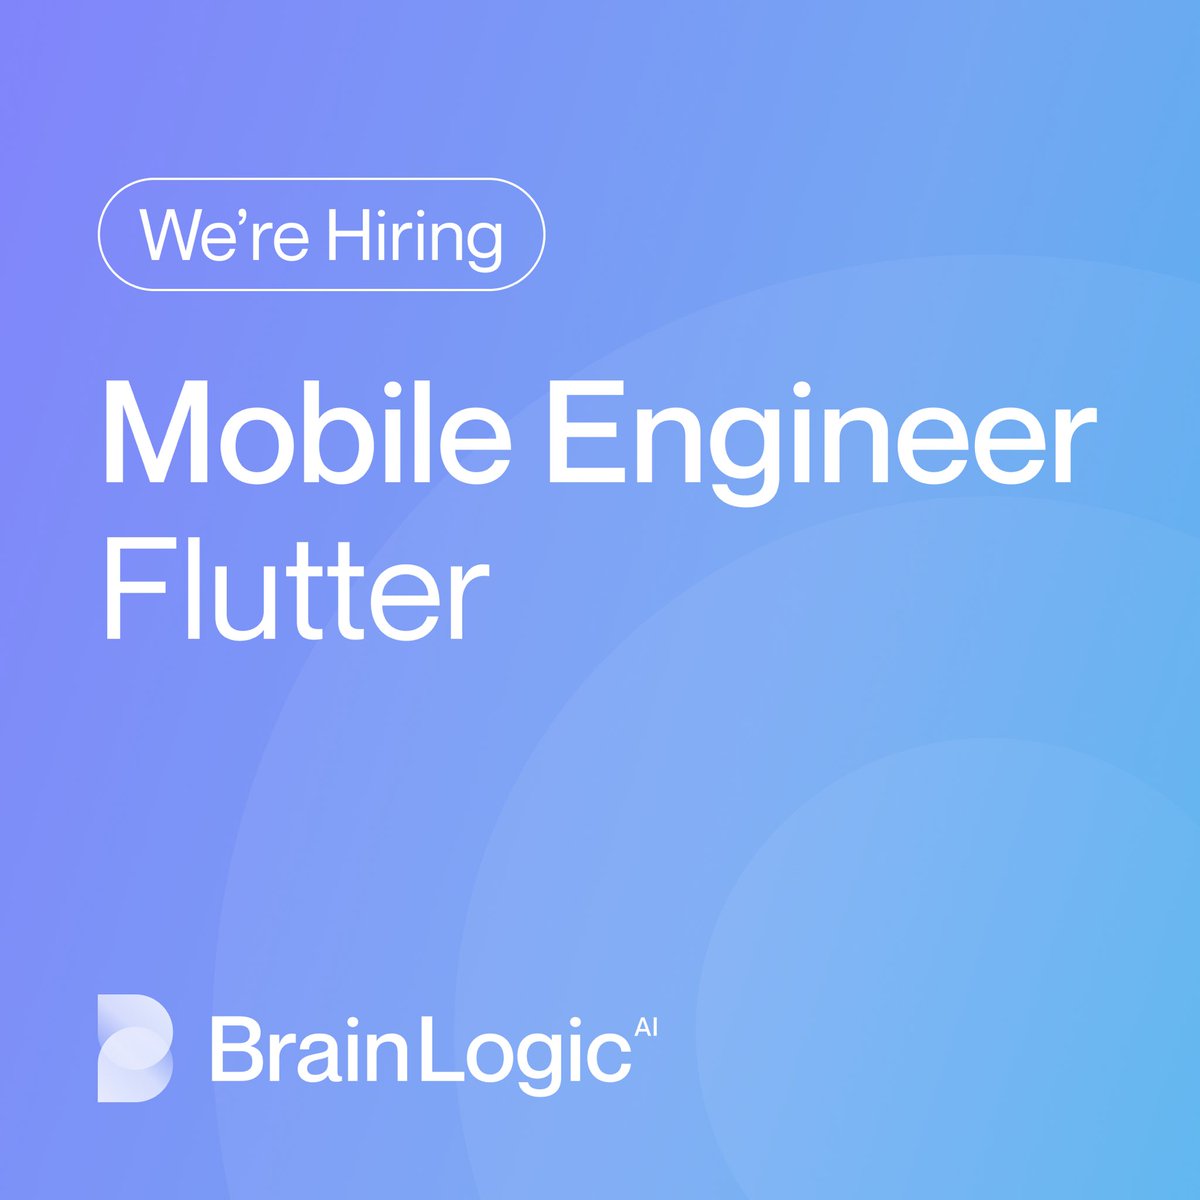 We are hiring an amazing Mobile Engineer with proven Flutter experience. Apply here: tinyurl.com/2s3j79uc